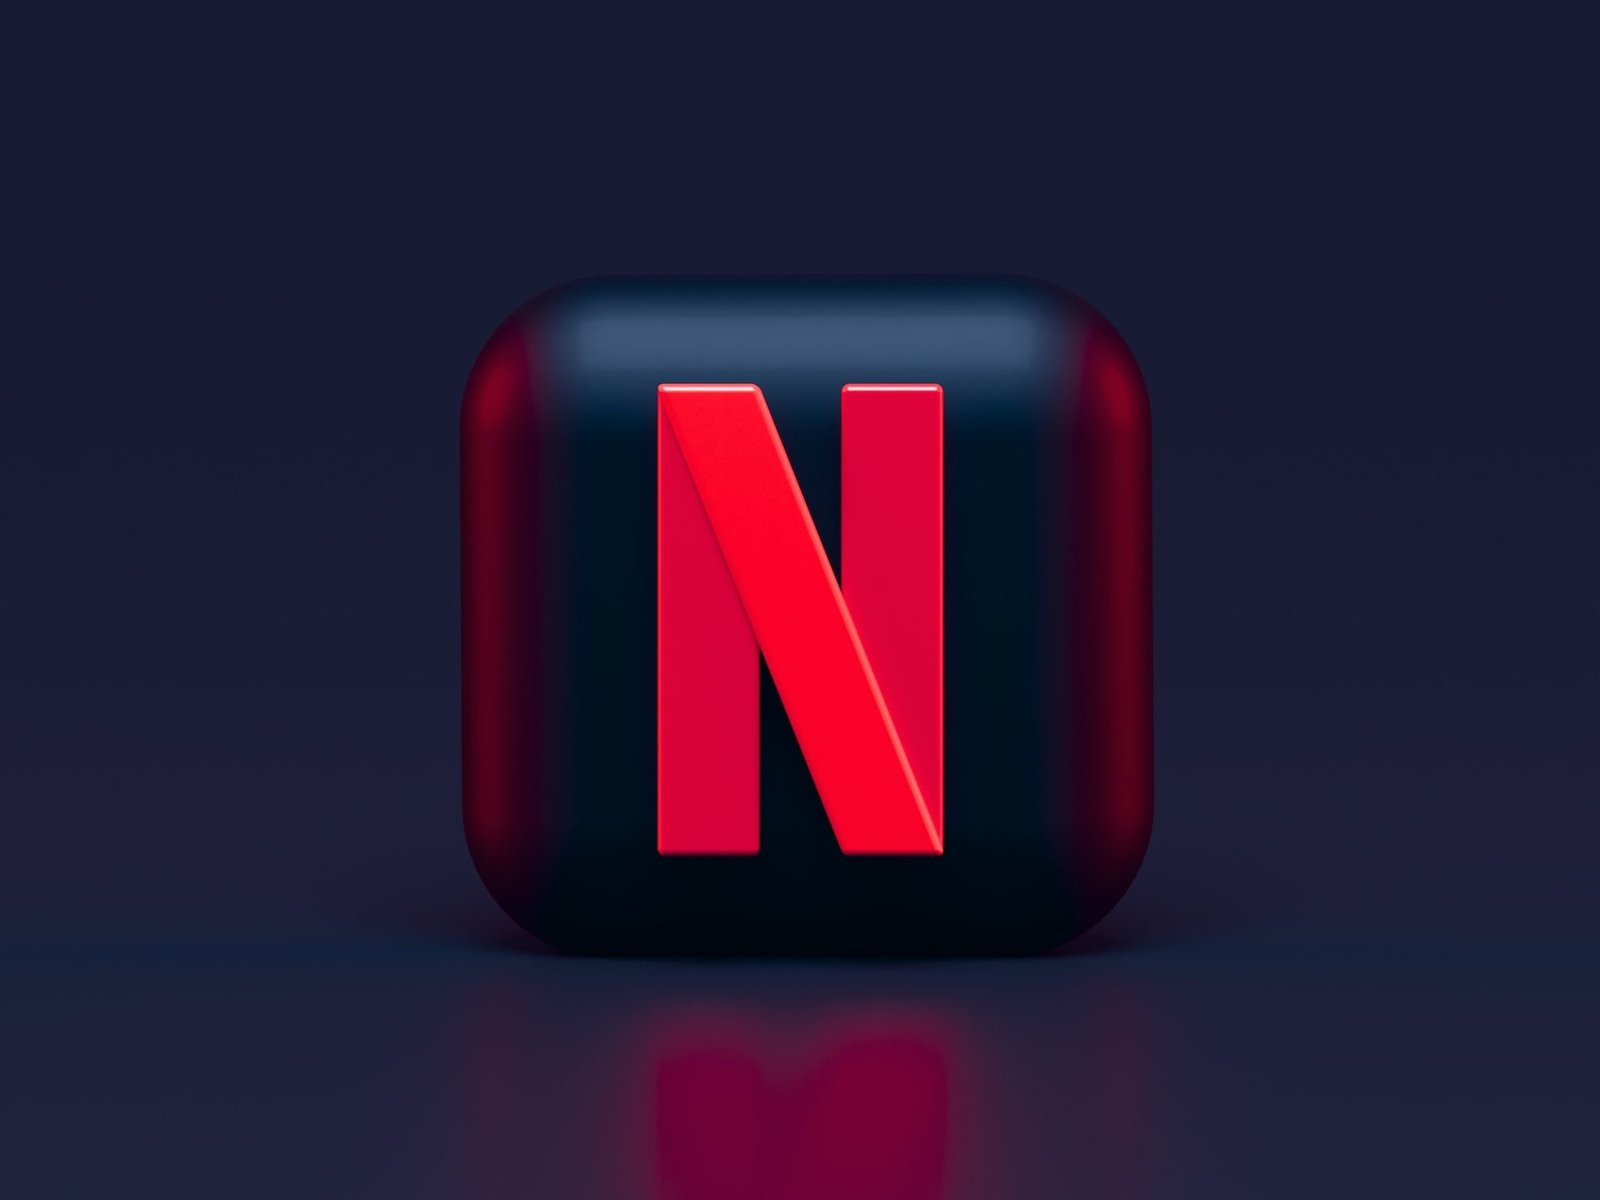 Delete Netflix & USE This Apps to Watch All Shows/Movies